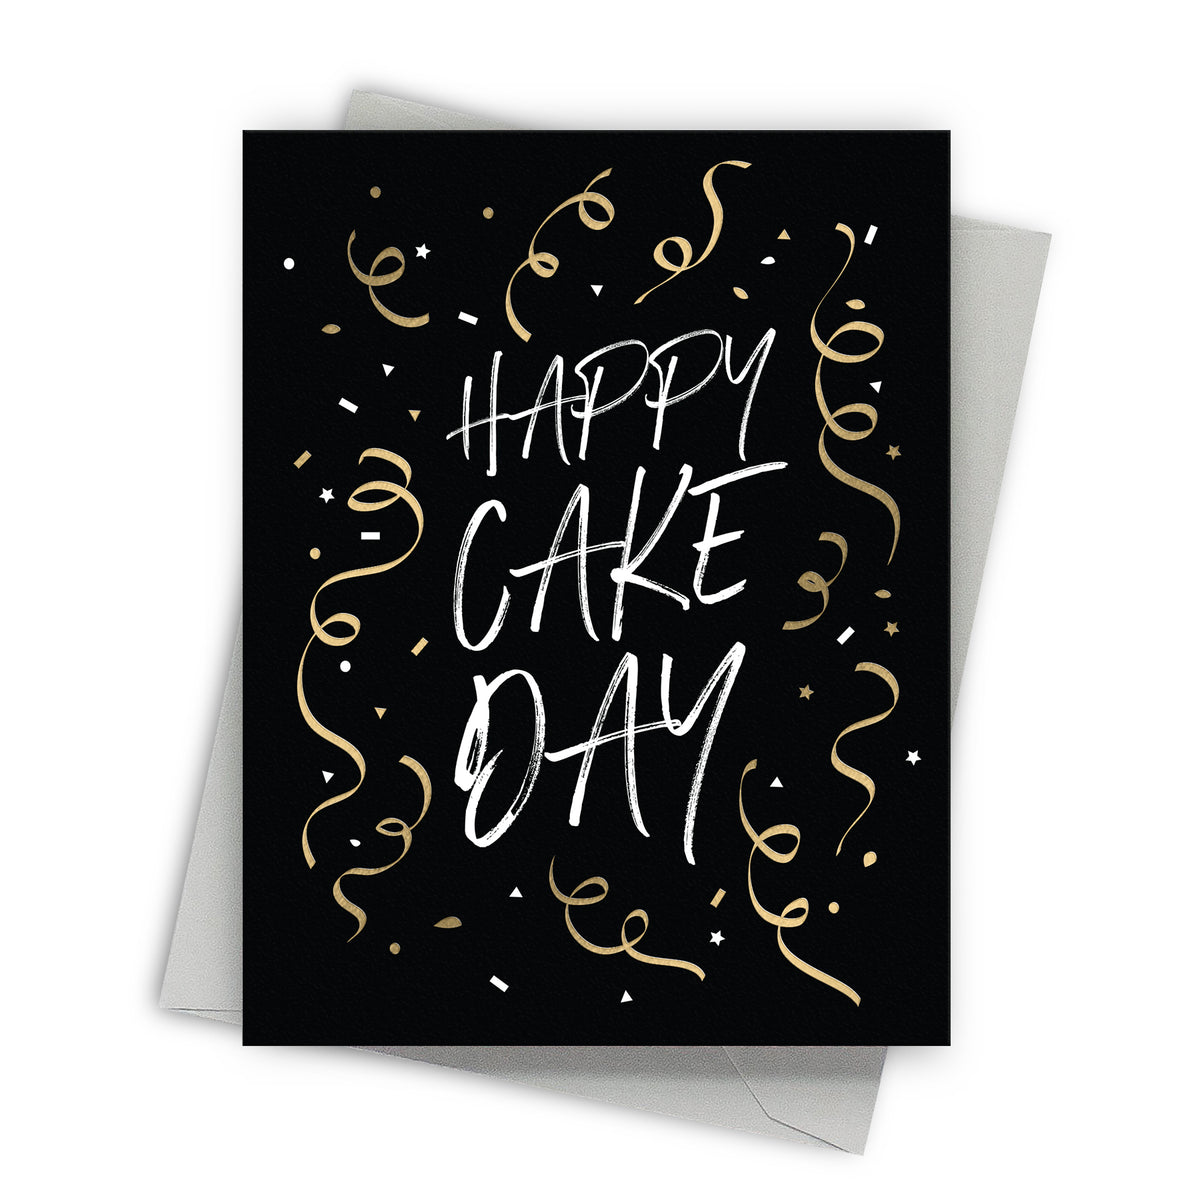 Happy Cake Day by Fine Moments